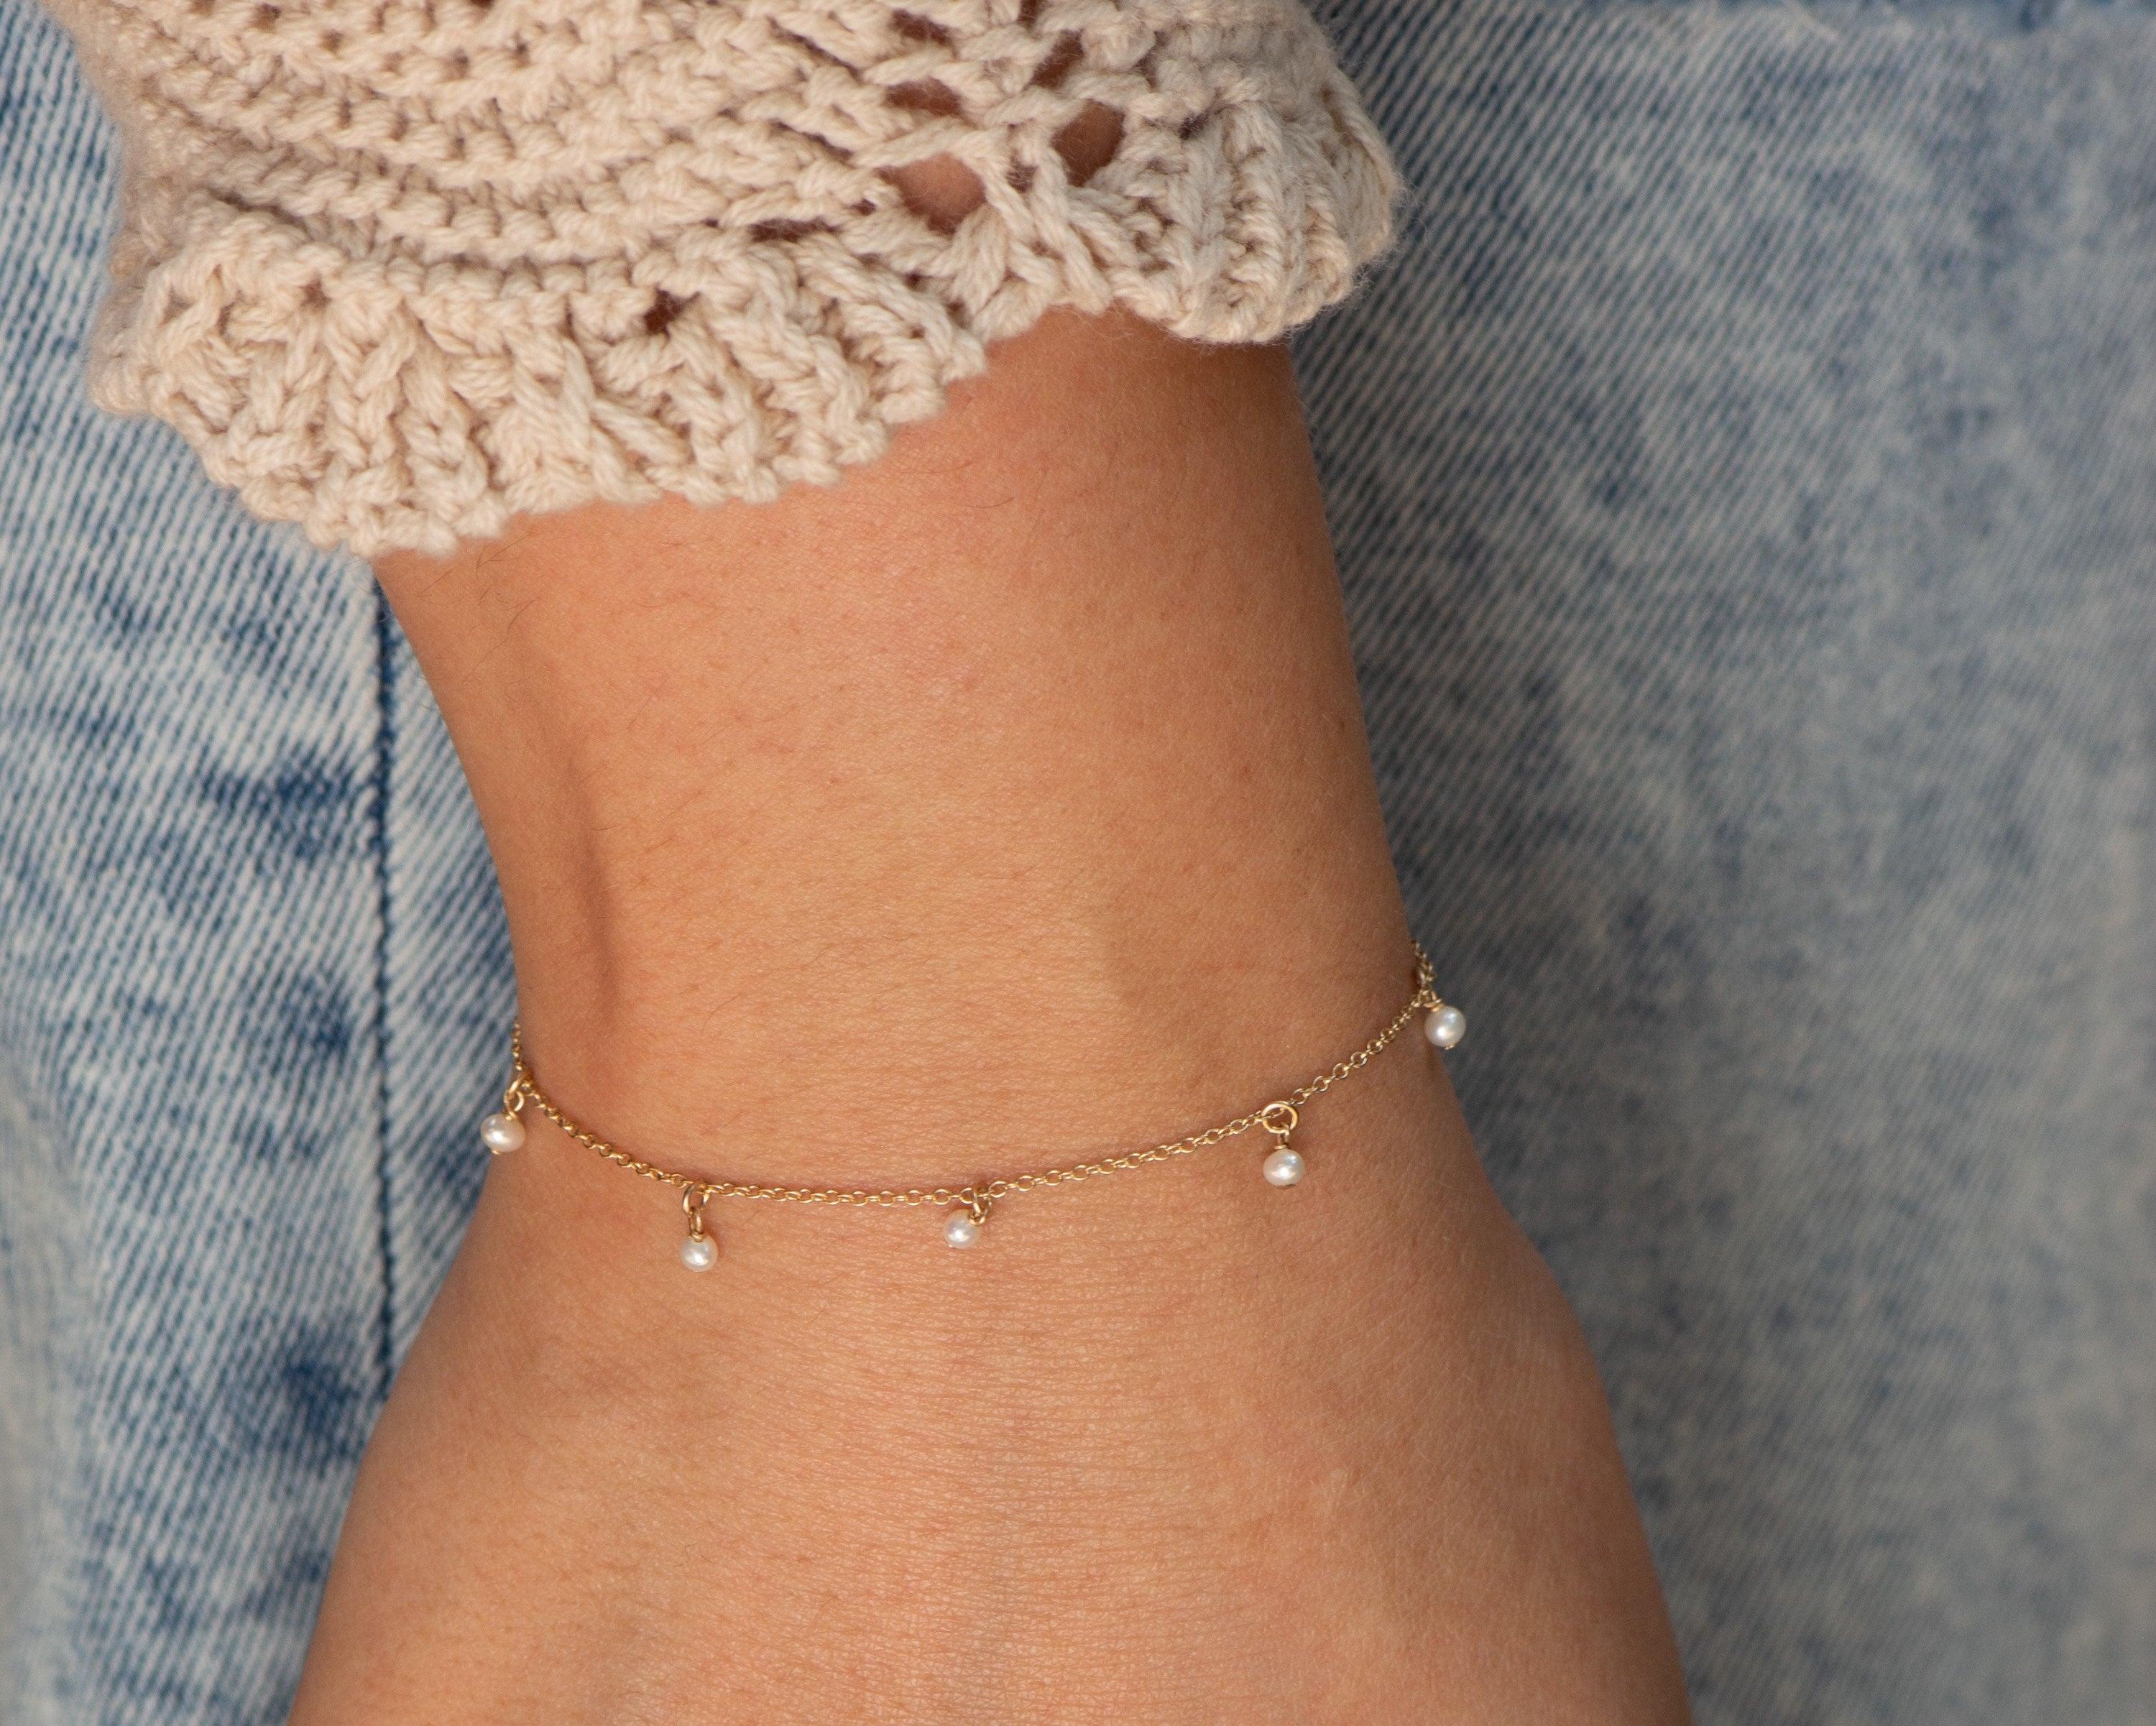 Macarena Pearls Bracelet - Morse and Dainty